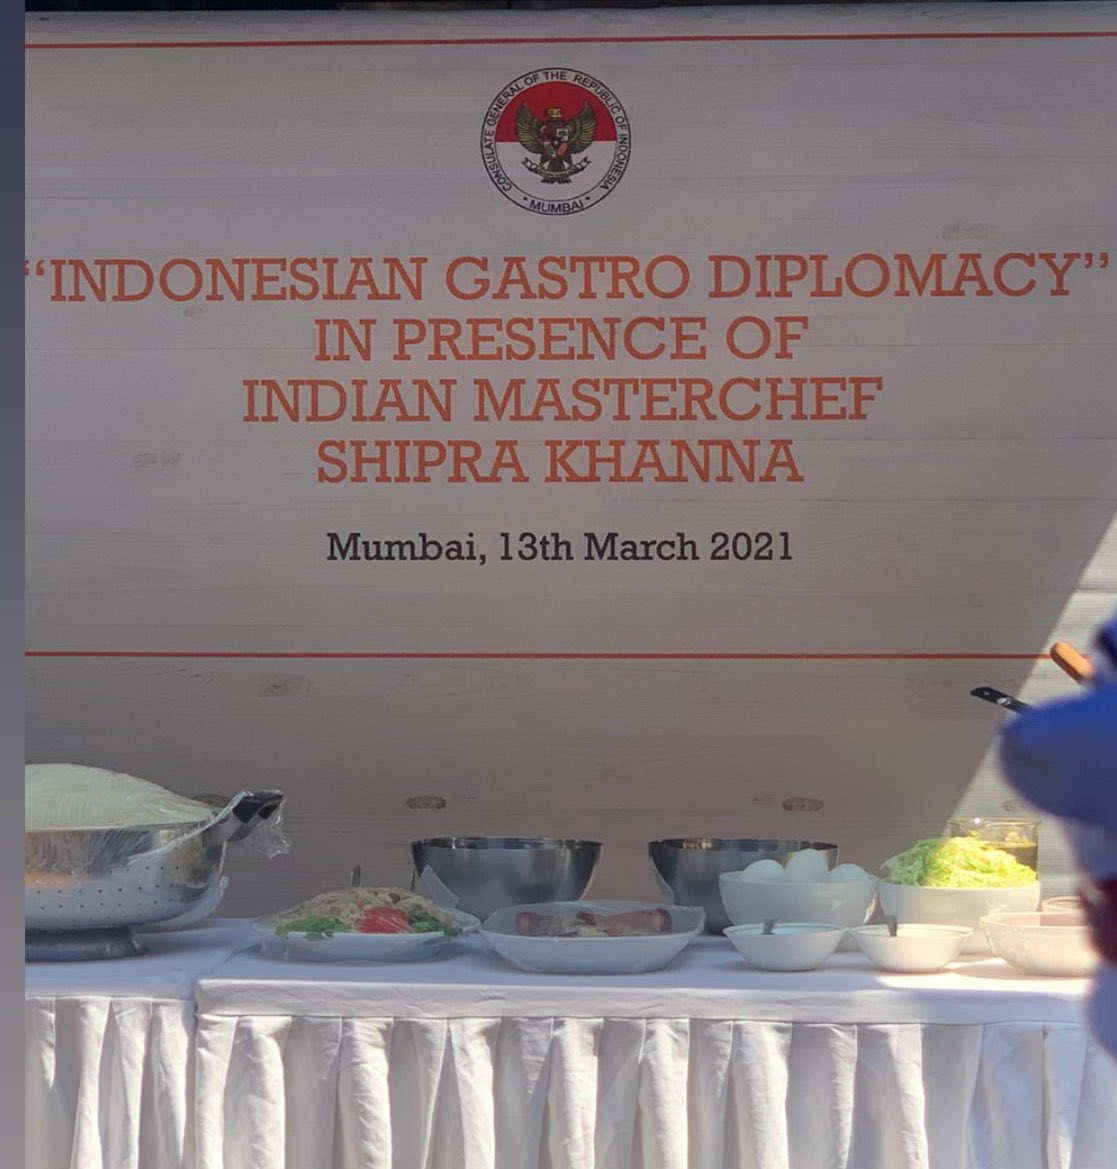 Name Shipra Khanna on a banner at Indonesian Gastro Diplomacy in March 2021